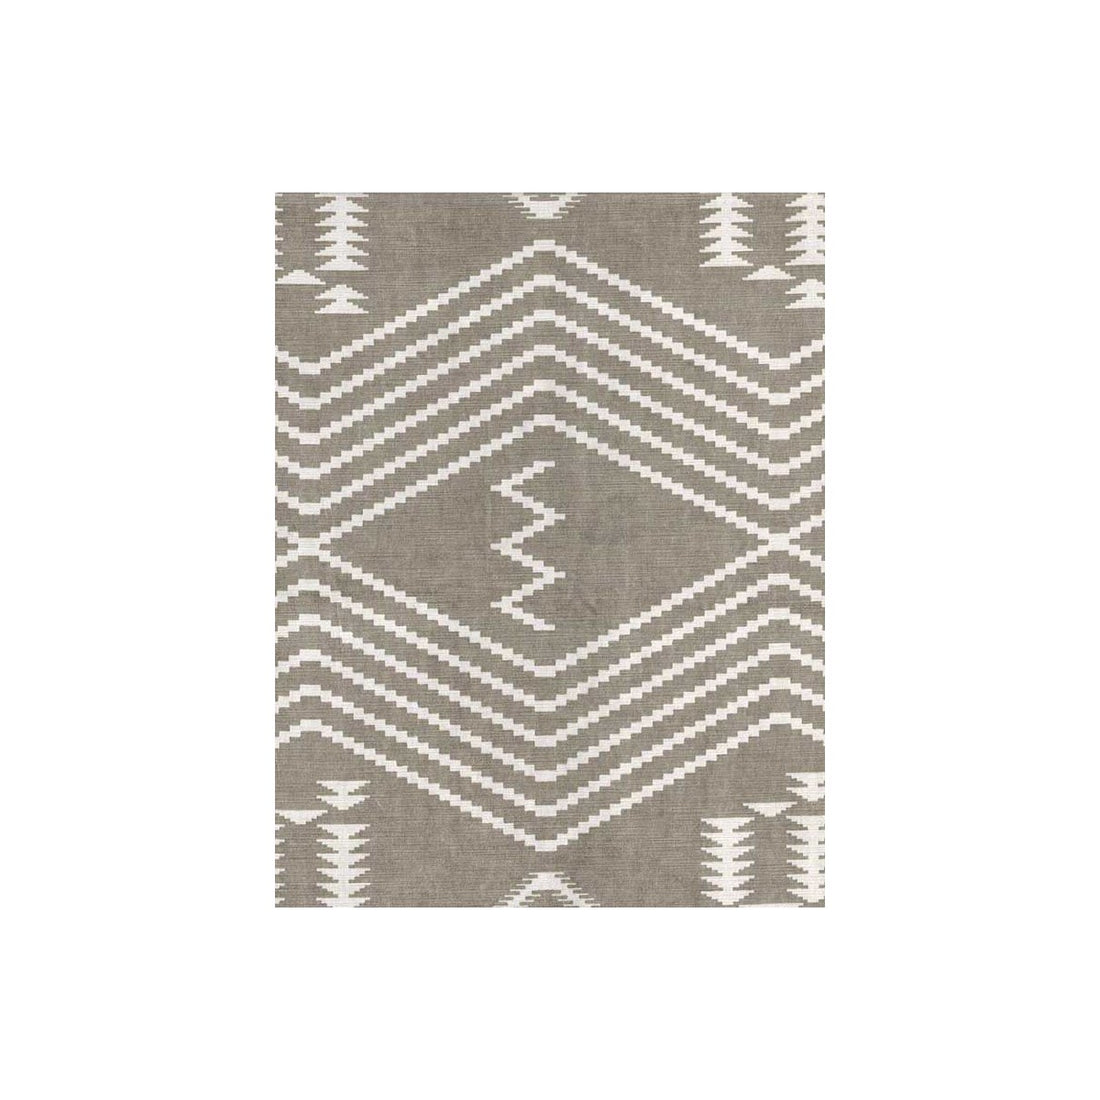 Navaho fabric in buff color - pattern AM100059.16.0 - by Kravet Couture in the Andrew Martin Compass Indiana collection